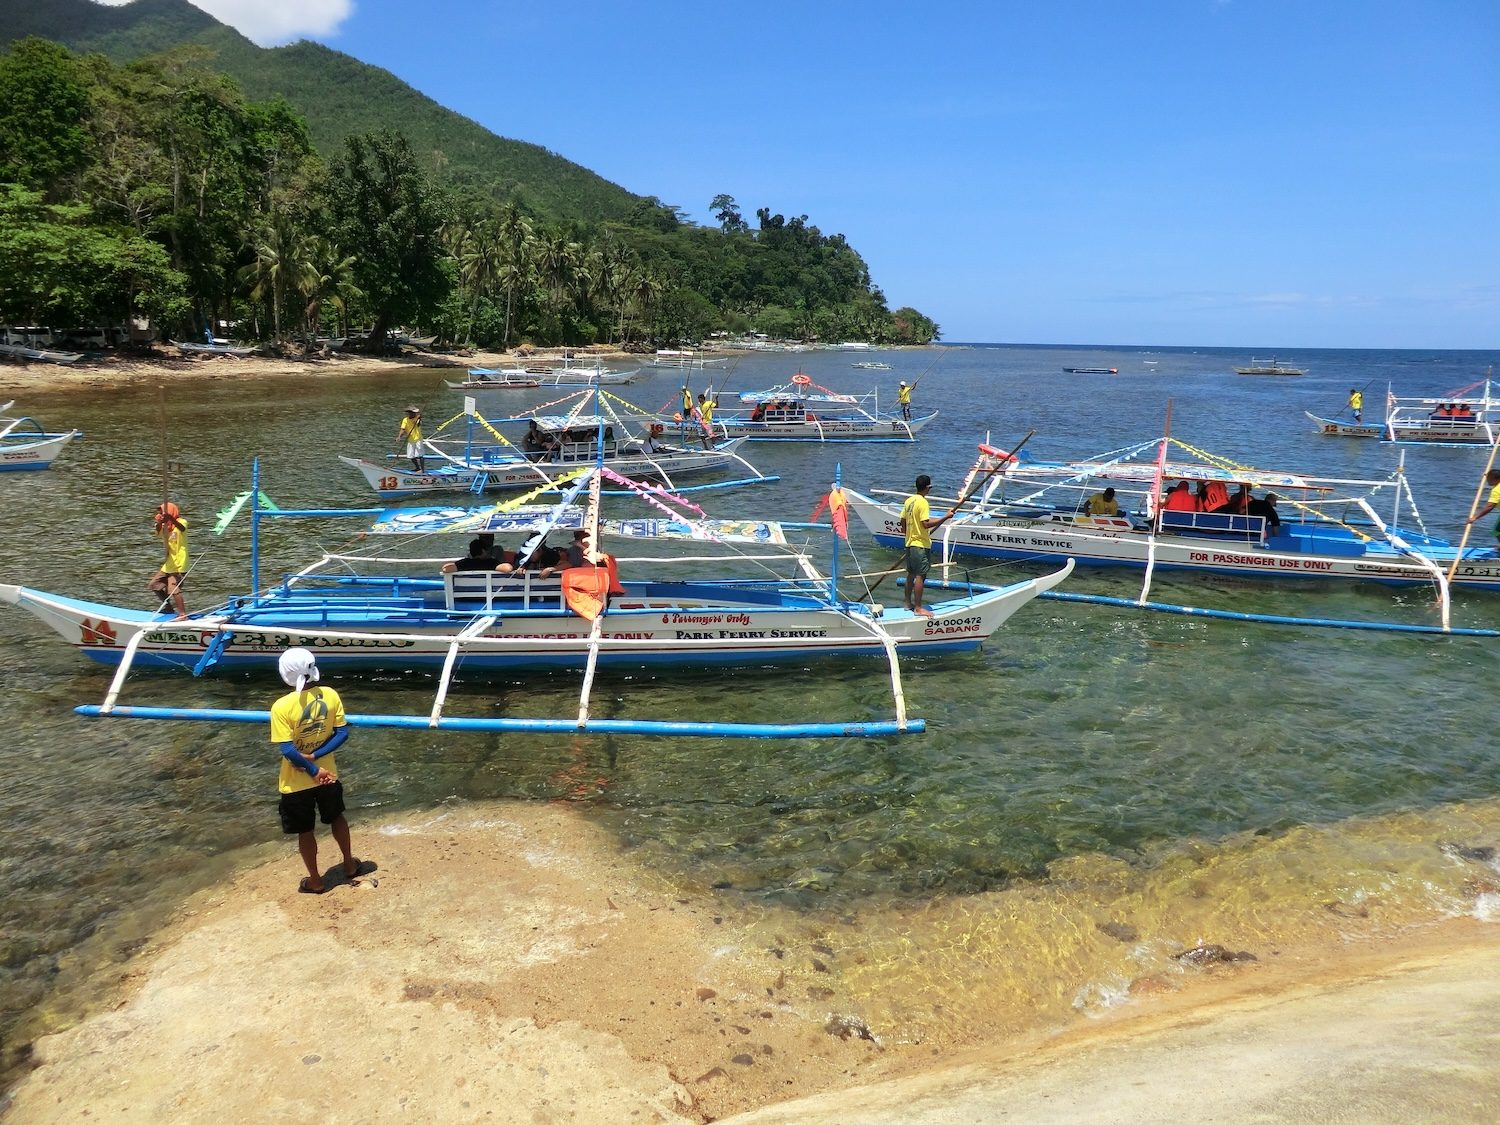 Puerto Princesa authorities to strictly implement 3-month closed season for reef fish in city